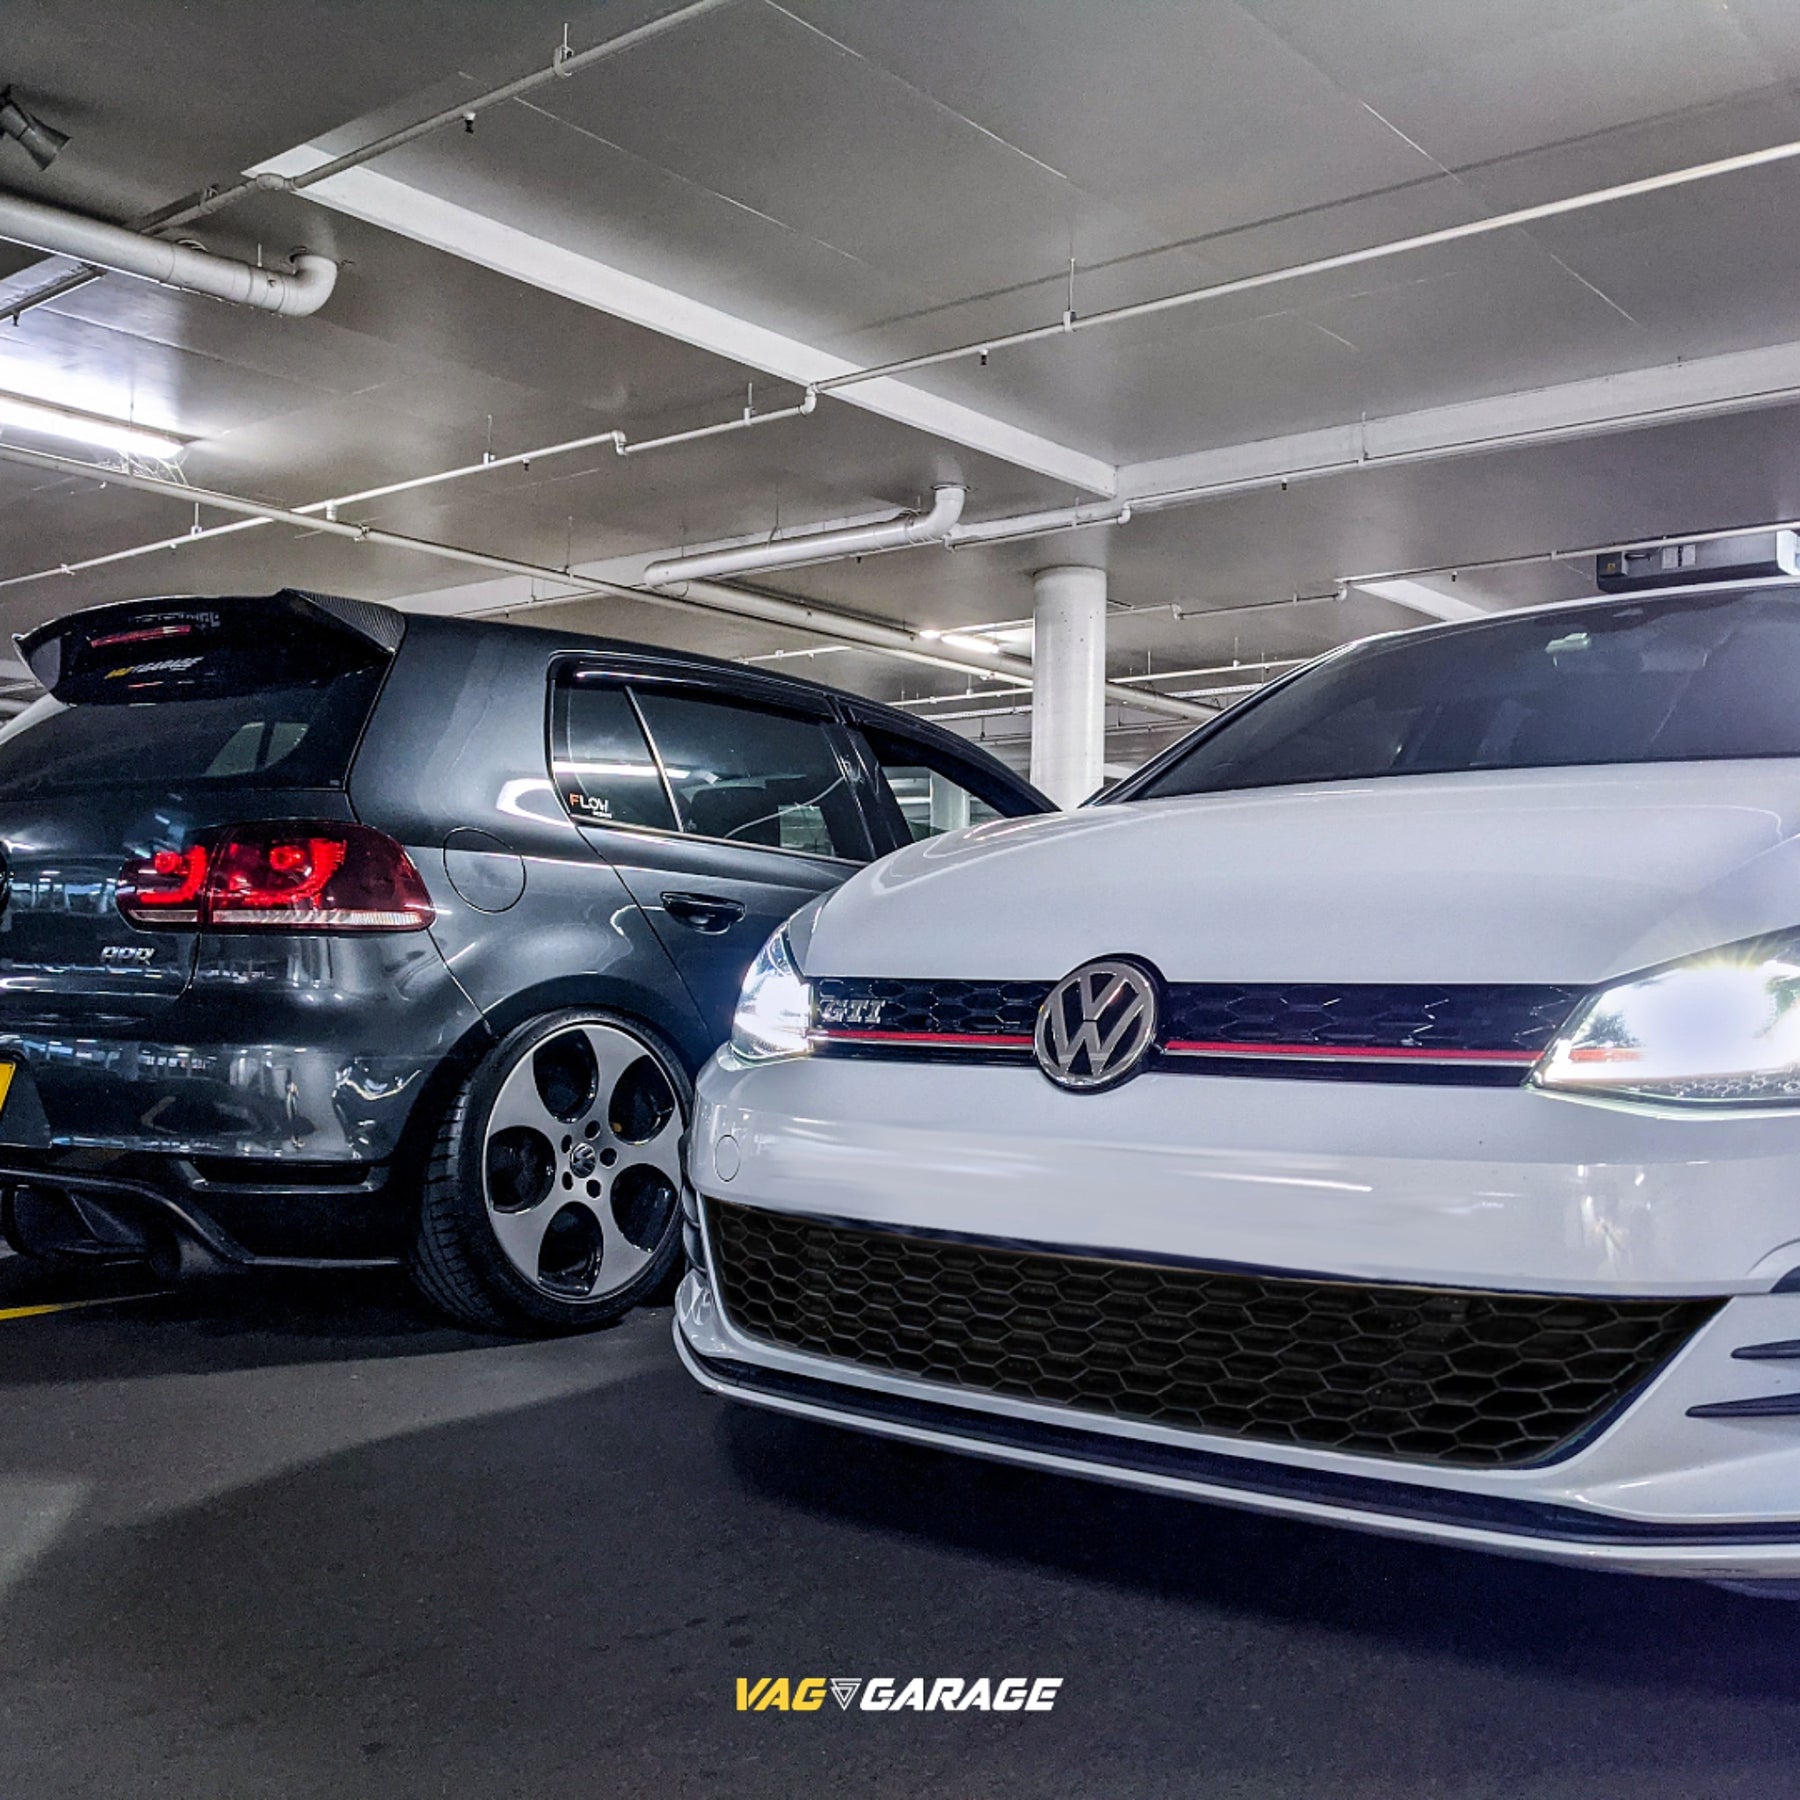 Best Mods for a Daily Driven Volkswagen MK7 or MK7.5 GTI for Looks and Performance.